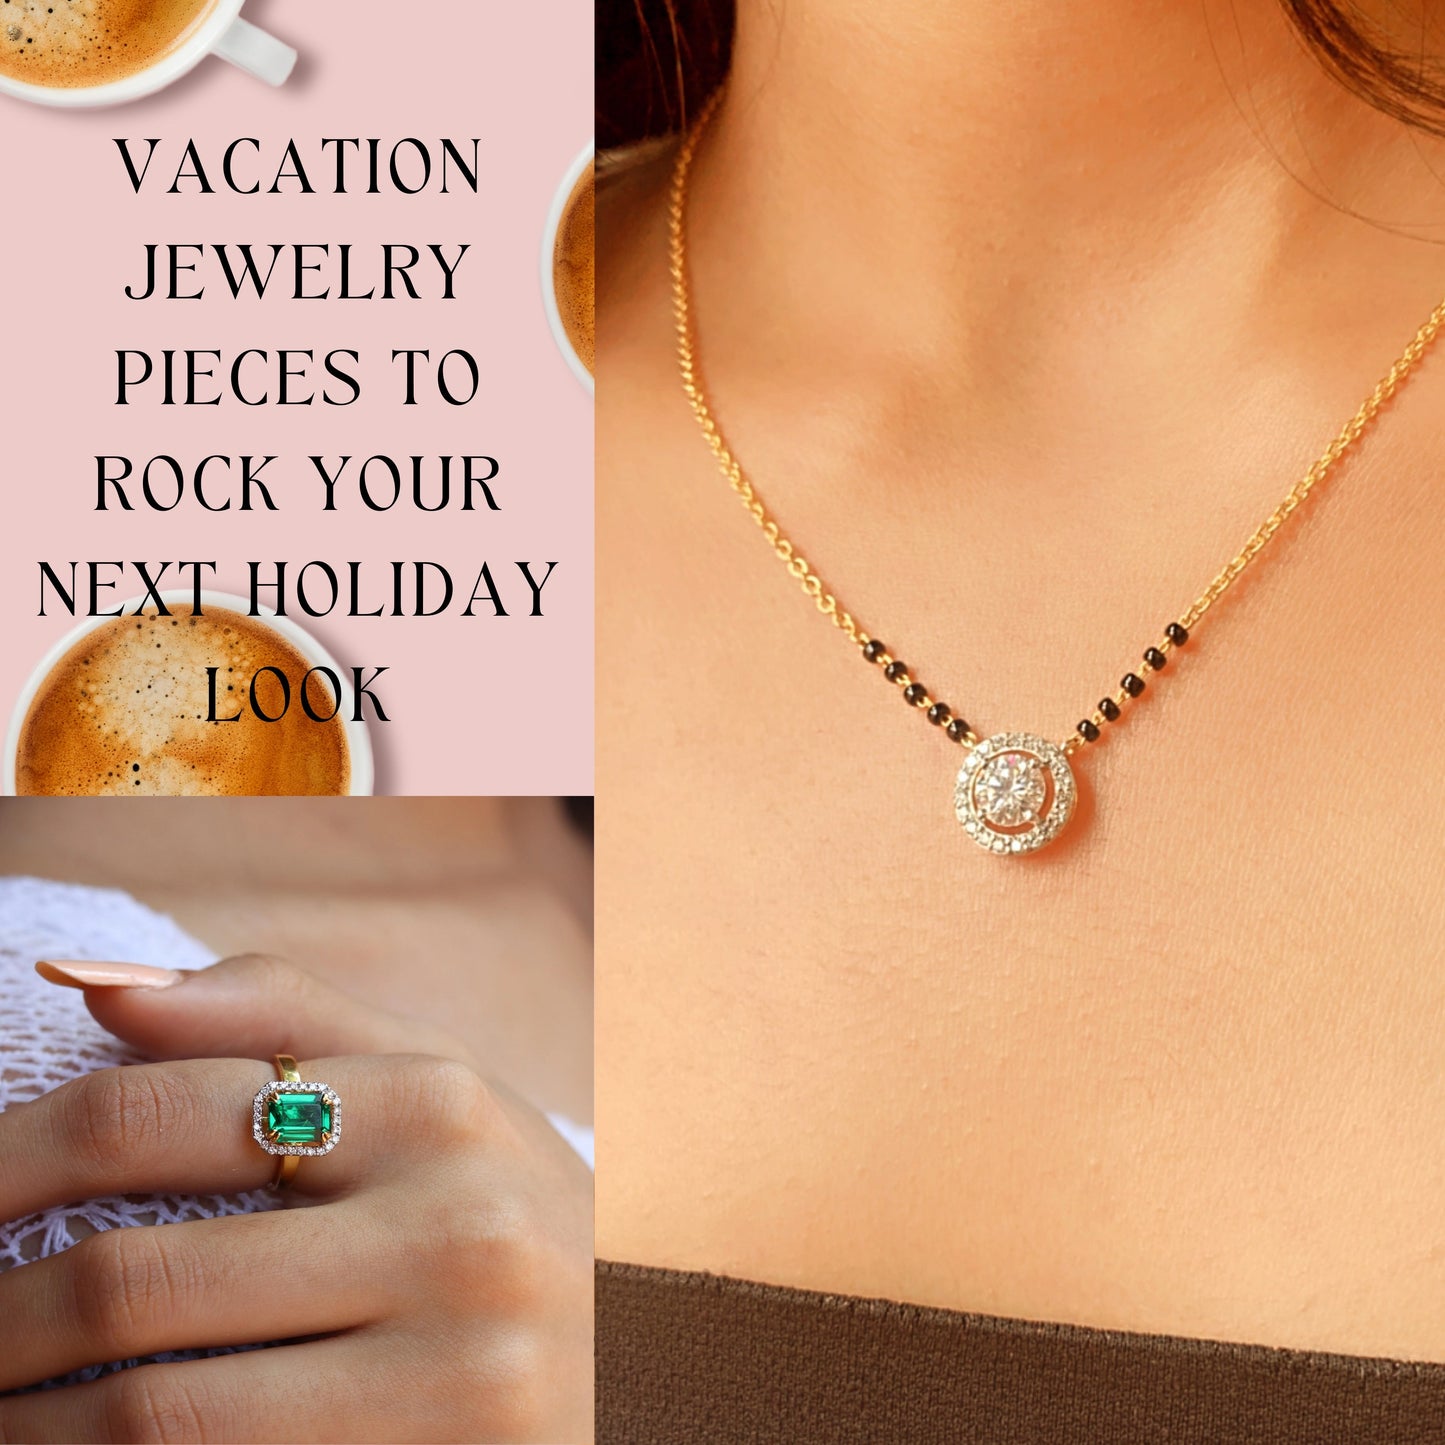 9 Vacation Jewelry Pieces To Rock Your Next Holiday Look